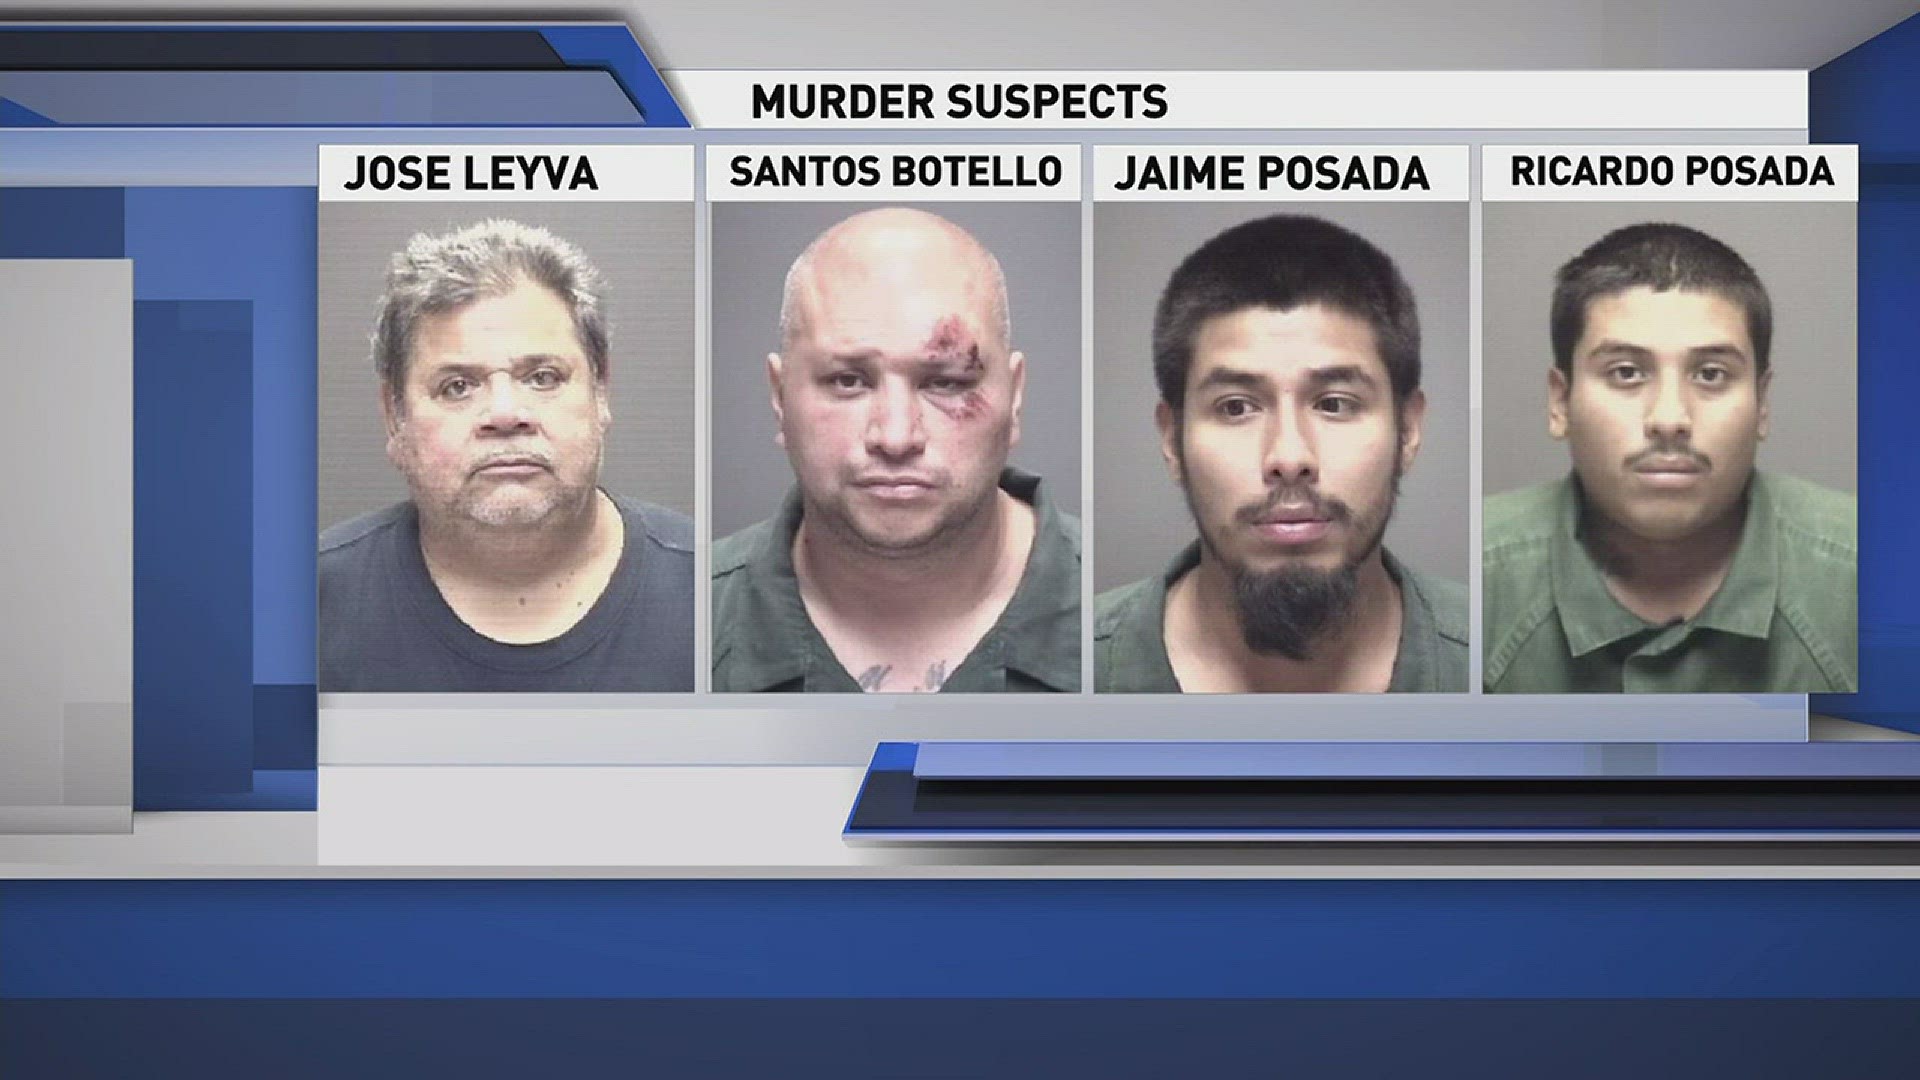 A self-proclaimed tarot card reader, demonic possession and sexually charged rituals were all part of a twisted plot that ended in murder, according to investigators.